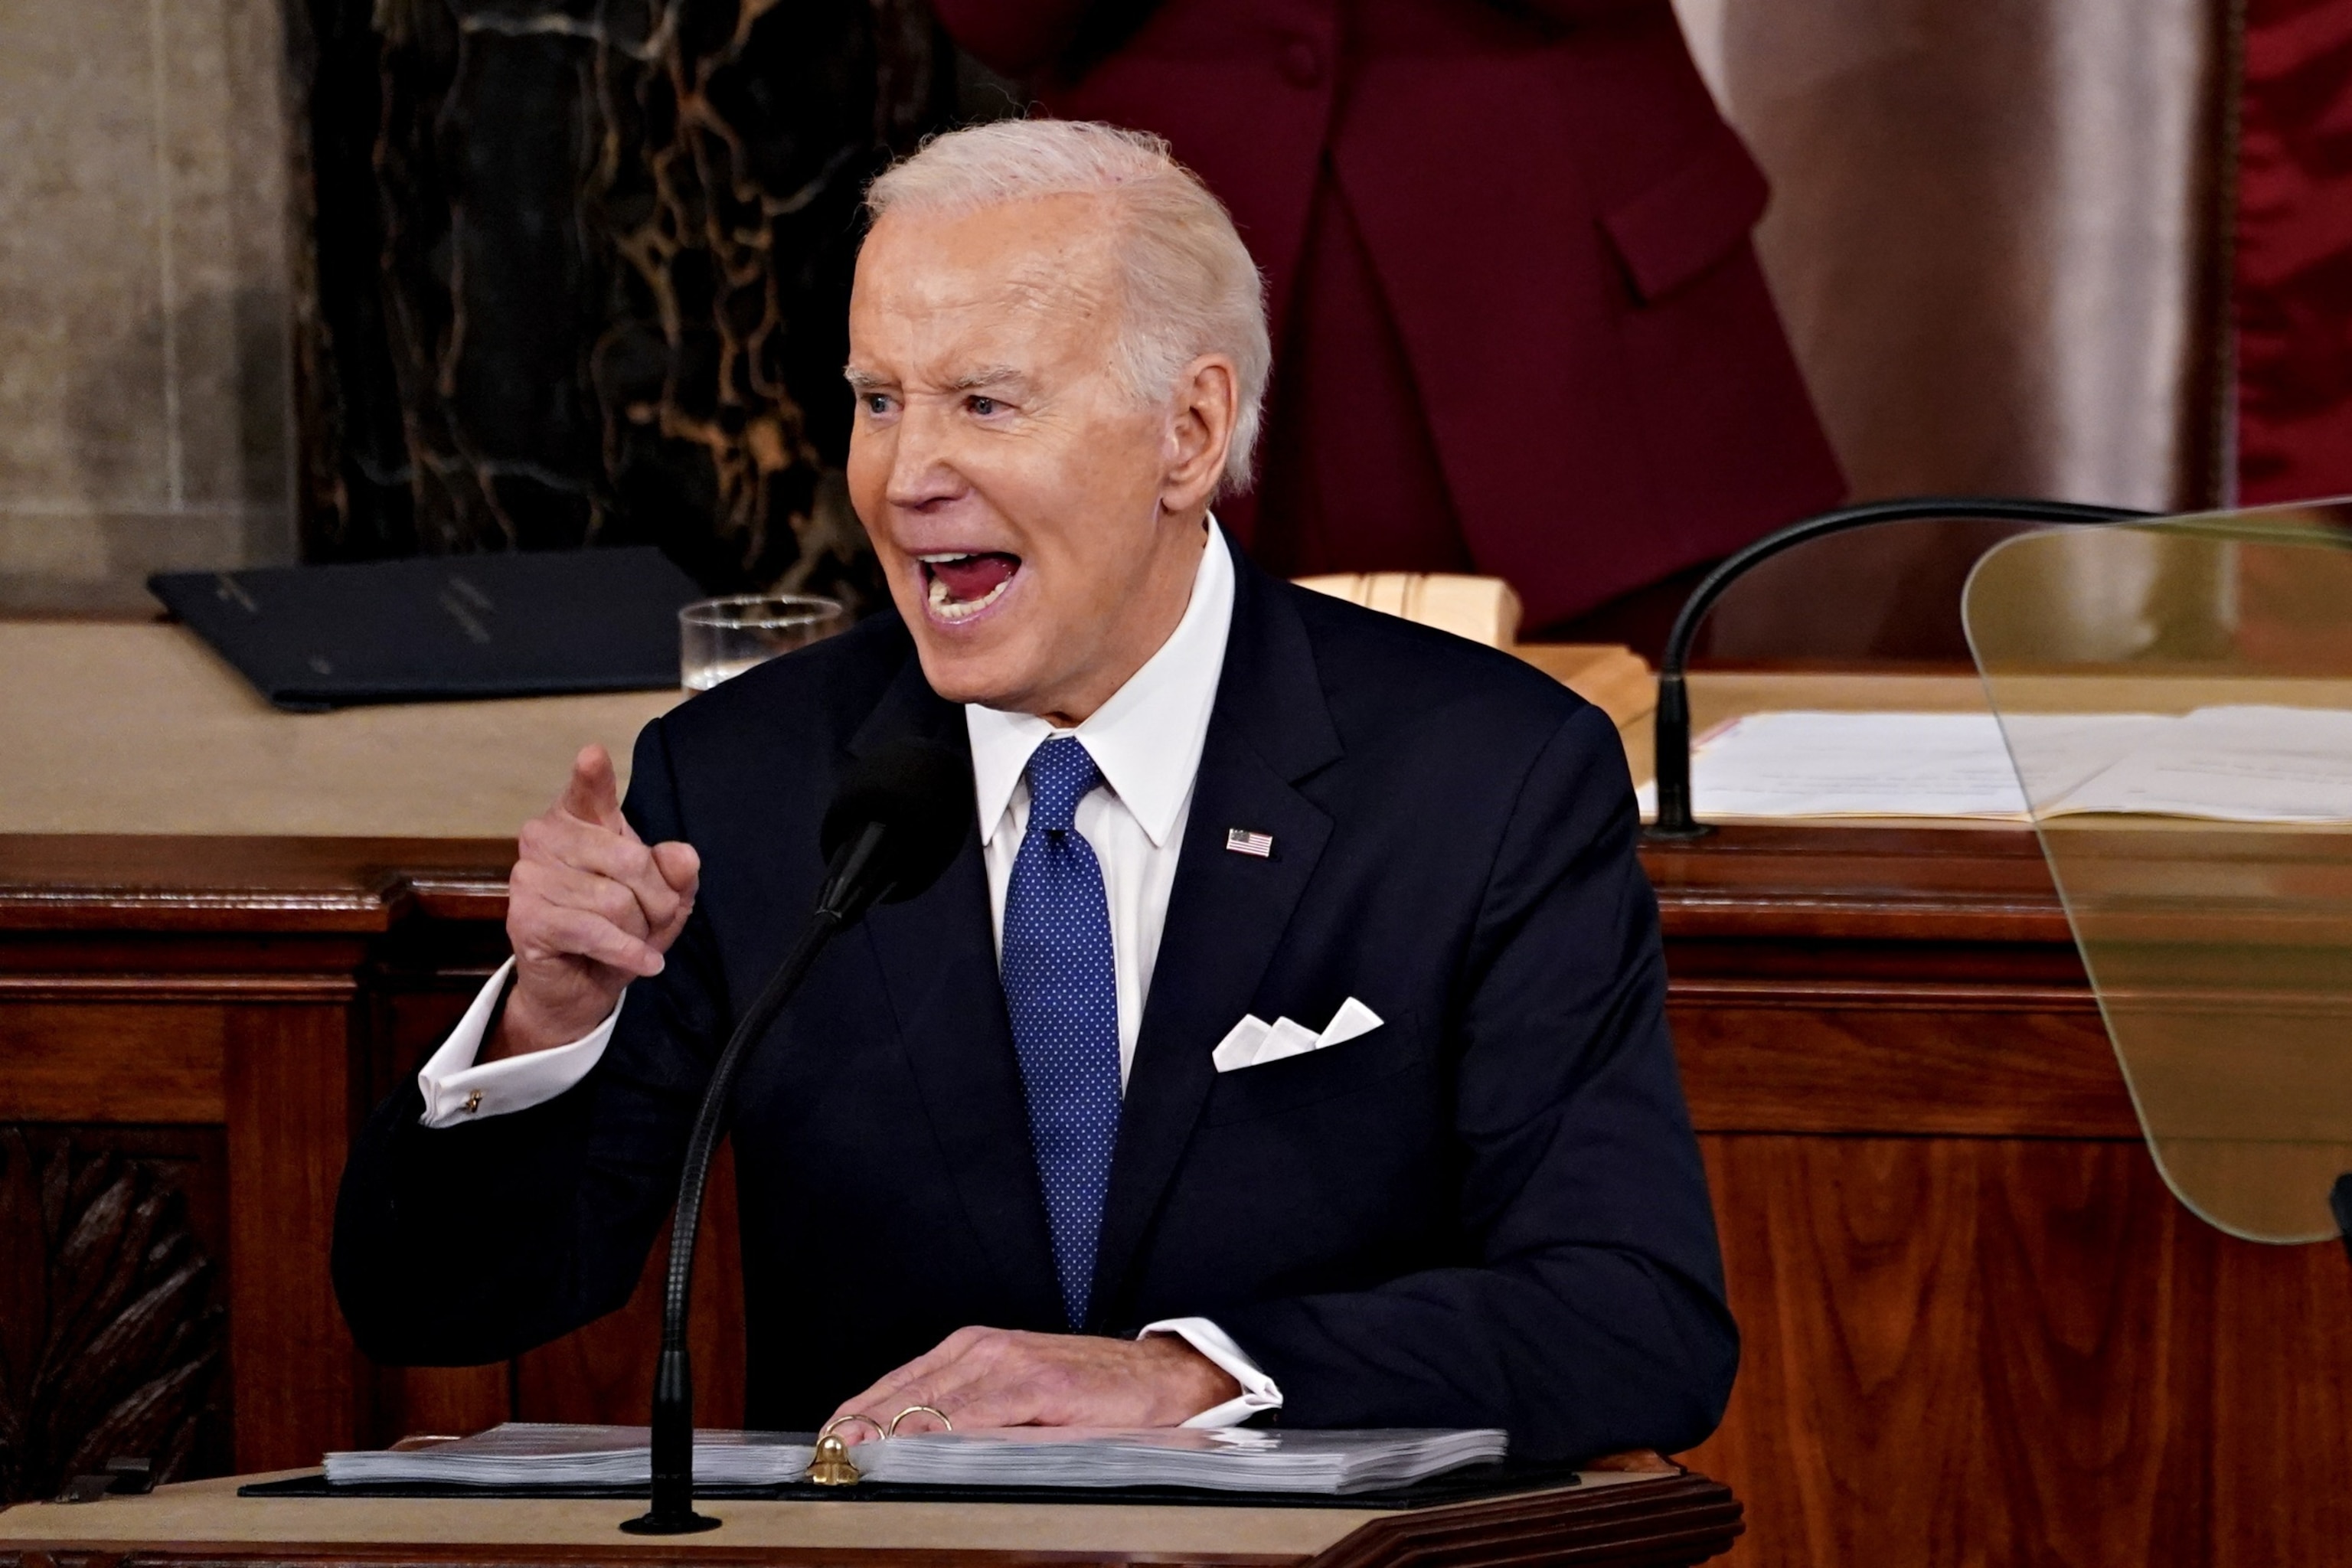 PHOTO: President Joe Biden speaks during a State of the Union address at the US Capitol in Washington, DC, Feb. 7, 2023.